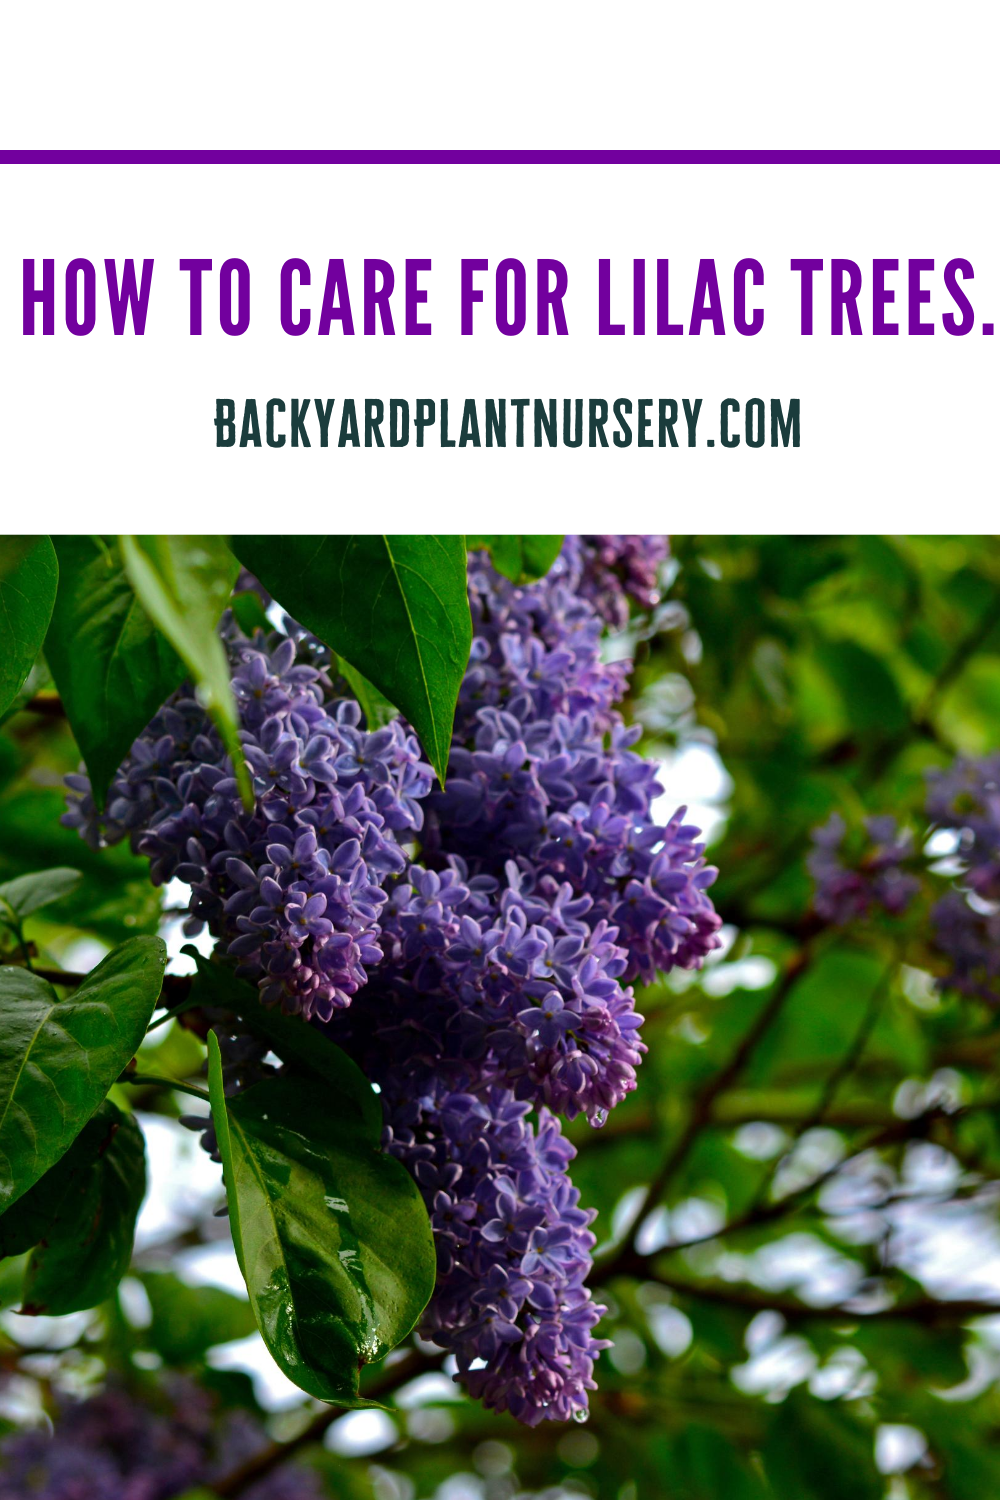 How to care for lilac trees.